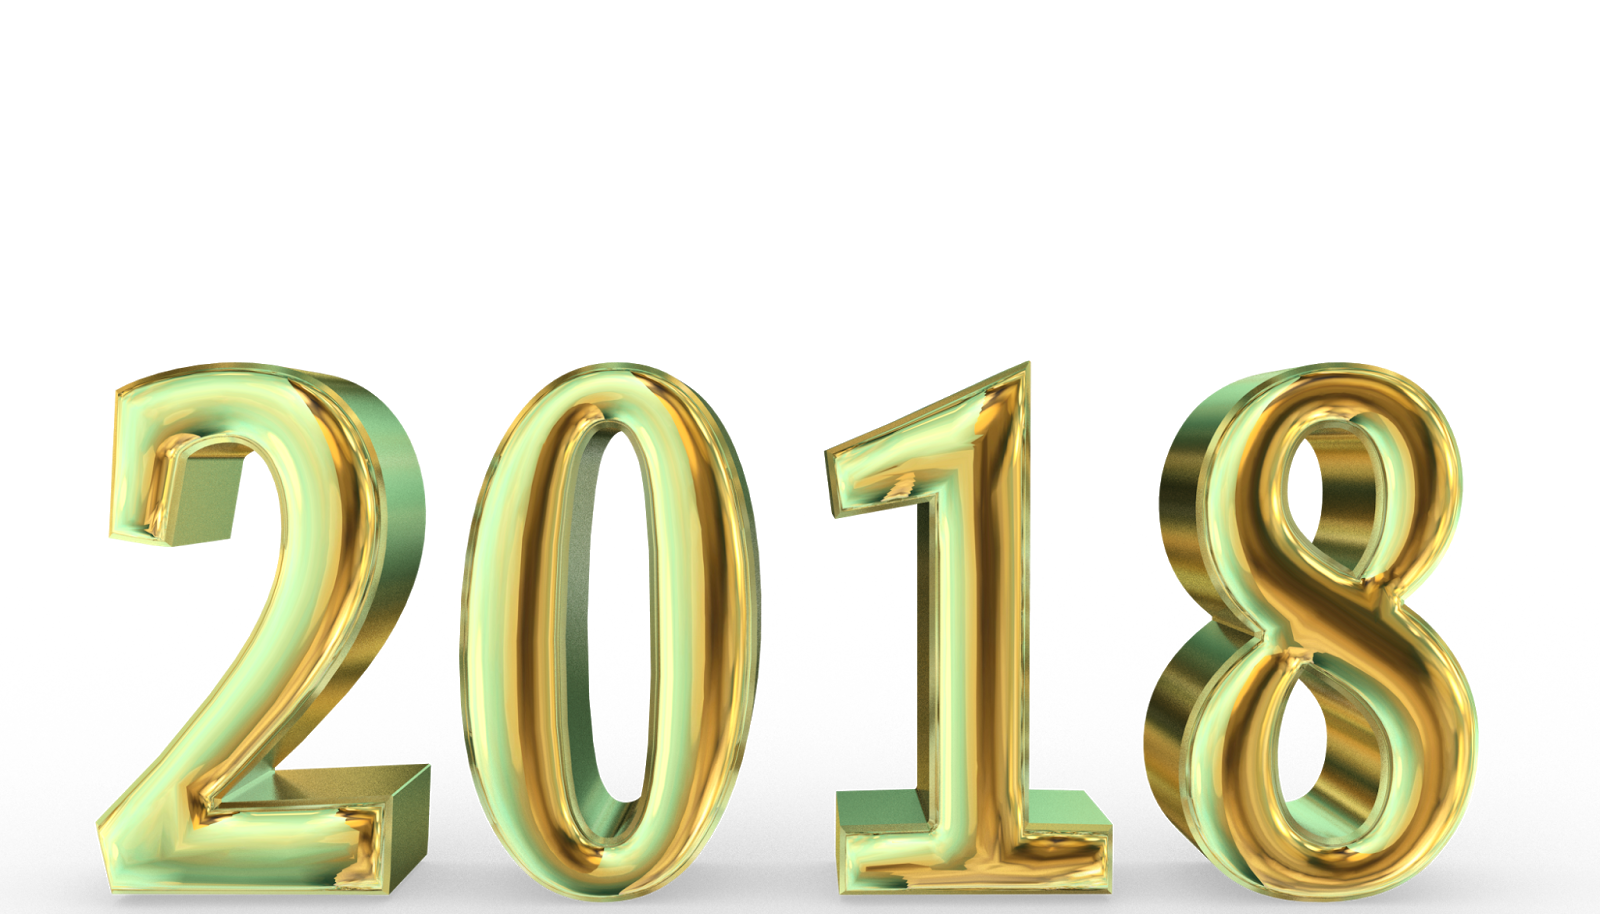 Download PNG image - 2018 Happy New Year PNG Free Download 